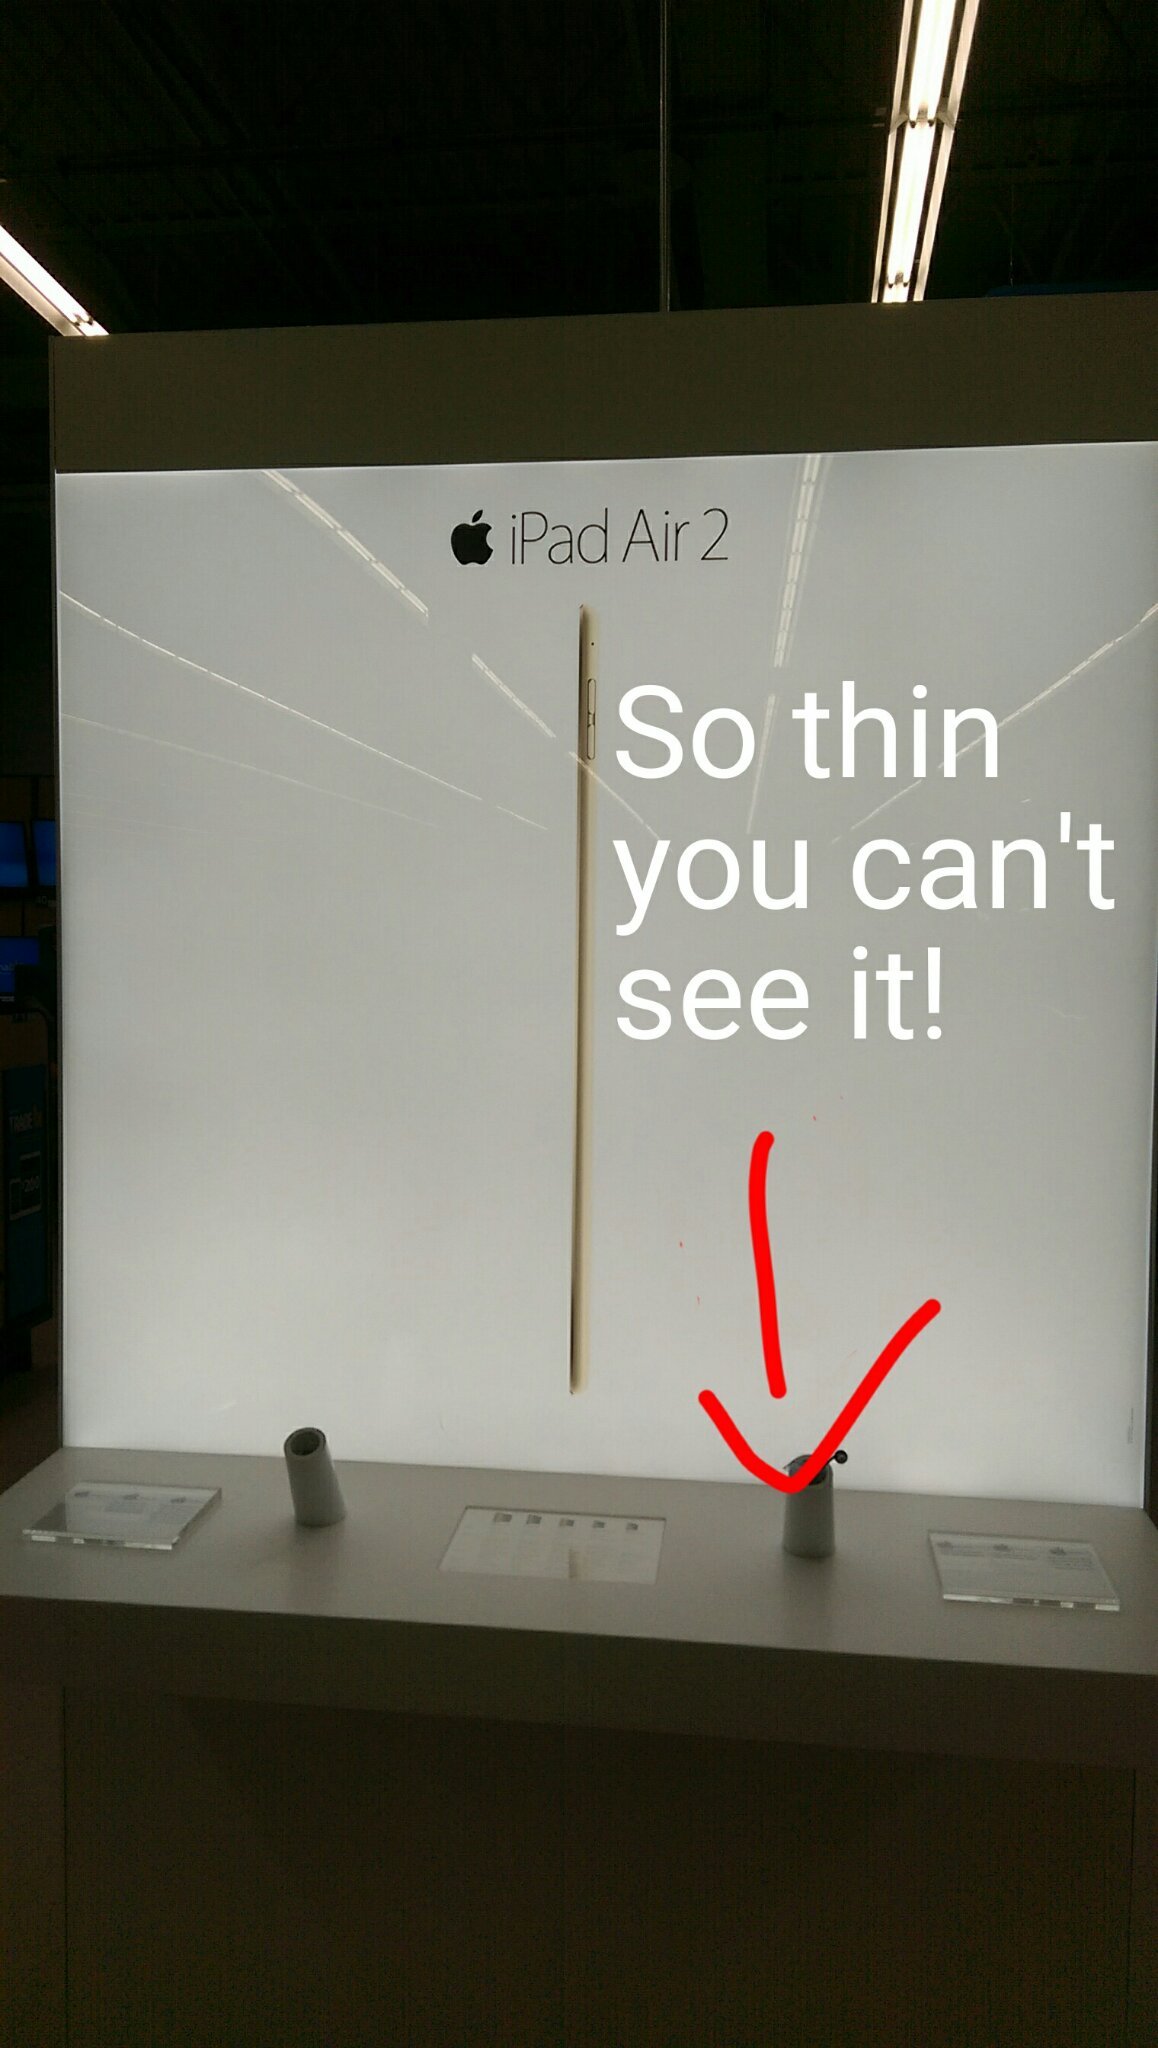 Apple is stepping up their advertising! - meme